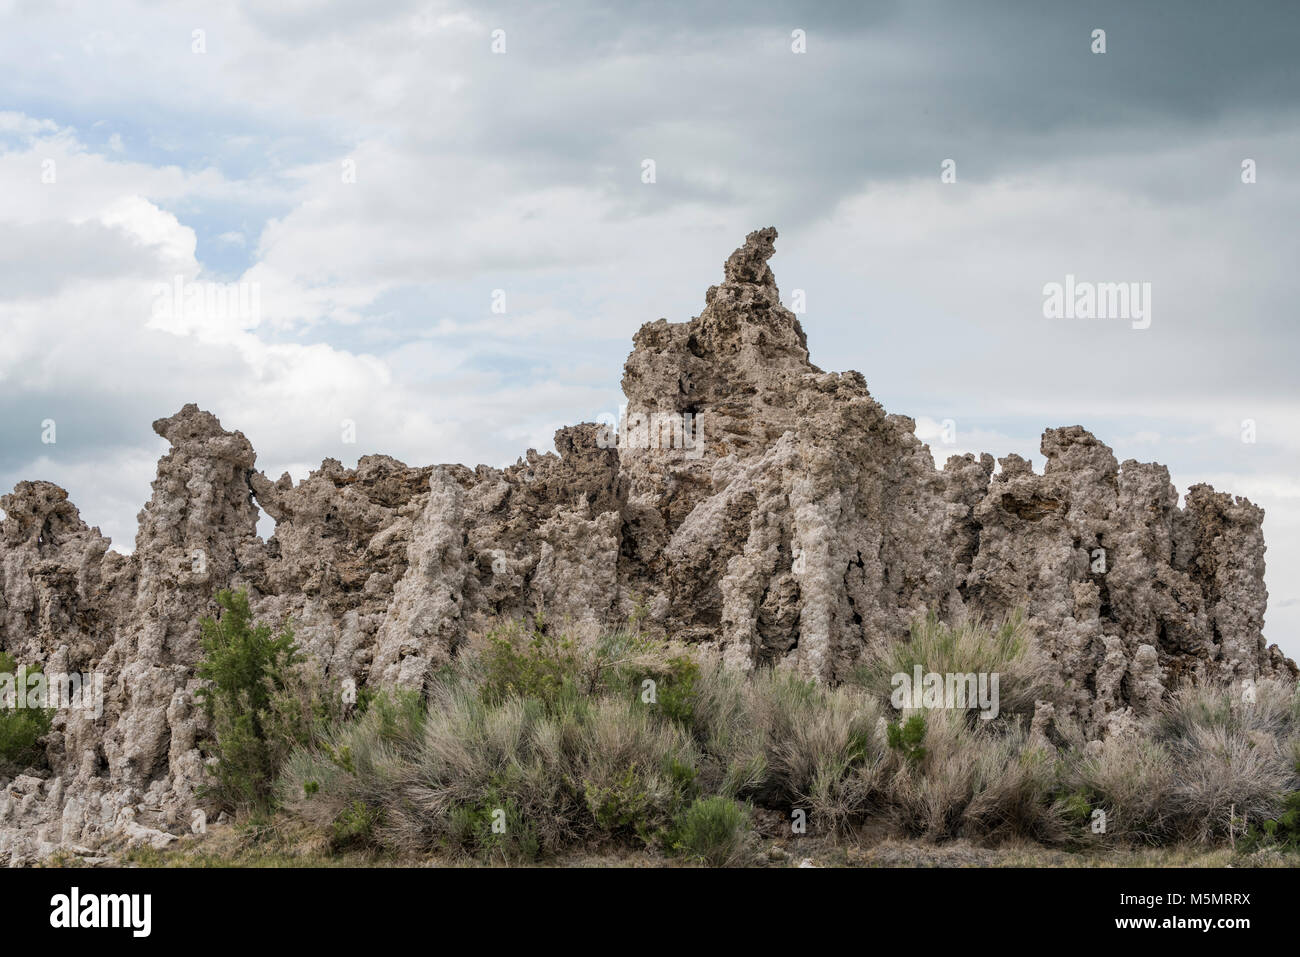 With storm clouds brewing, sand tufas stand tall over Mono Lake, marking the salty water's recession over millenia in Lee Vining, California Stock Photo